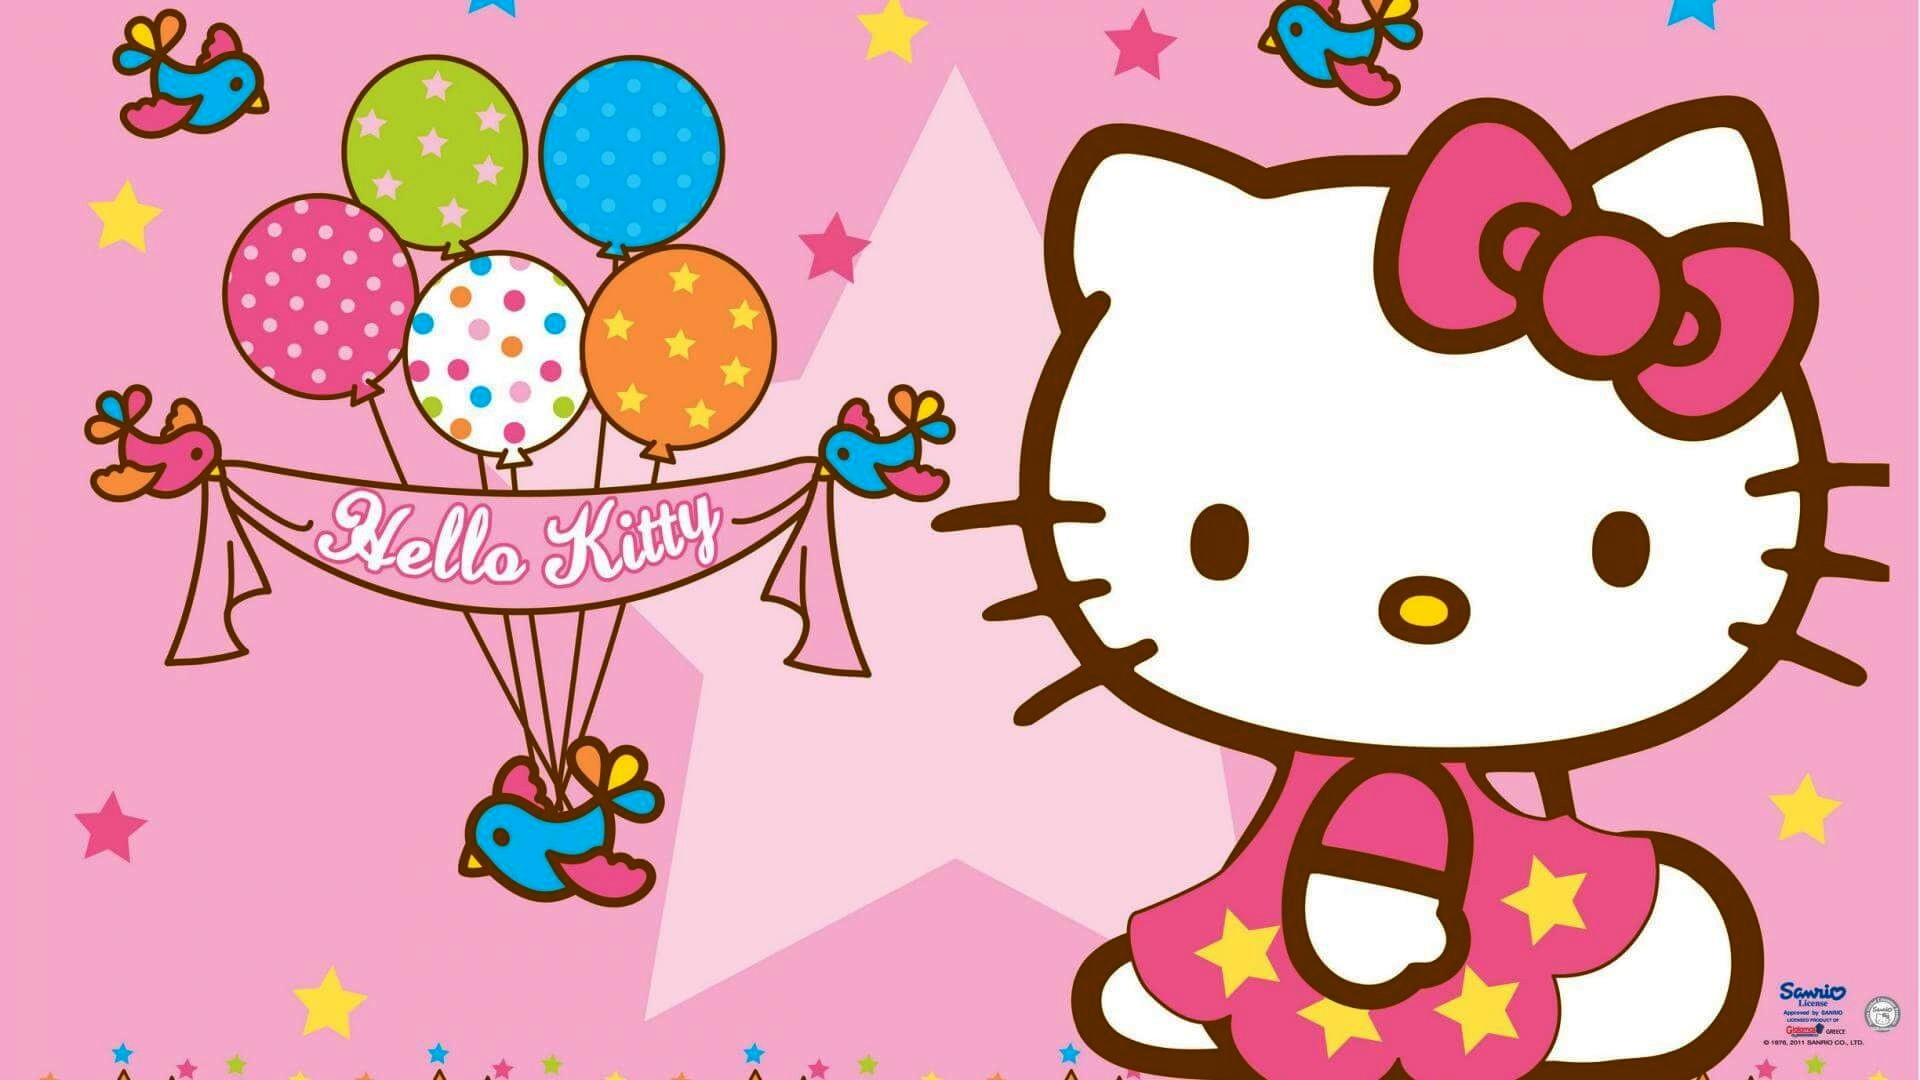 Wallpaper of Hello Kitty with high-resolution 1920x1080 pixel. You can use and set as wallpaper for Notebook Screensavers, Mac Wallpapers, Mobile Home Screen, iPhone or Android Phones Lock Screen